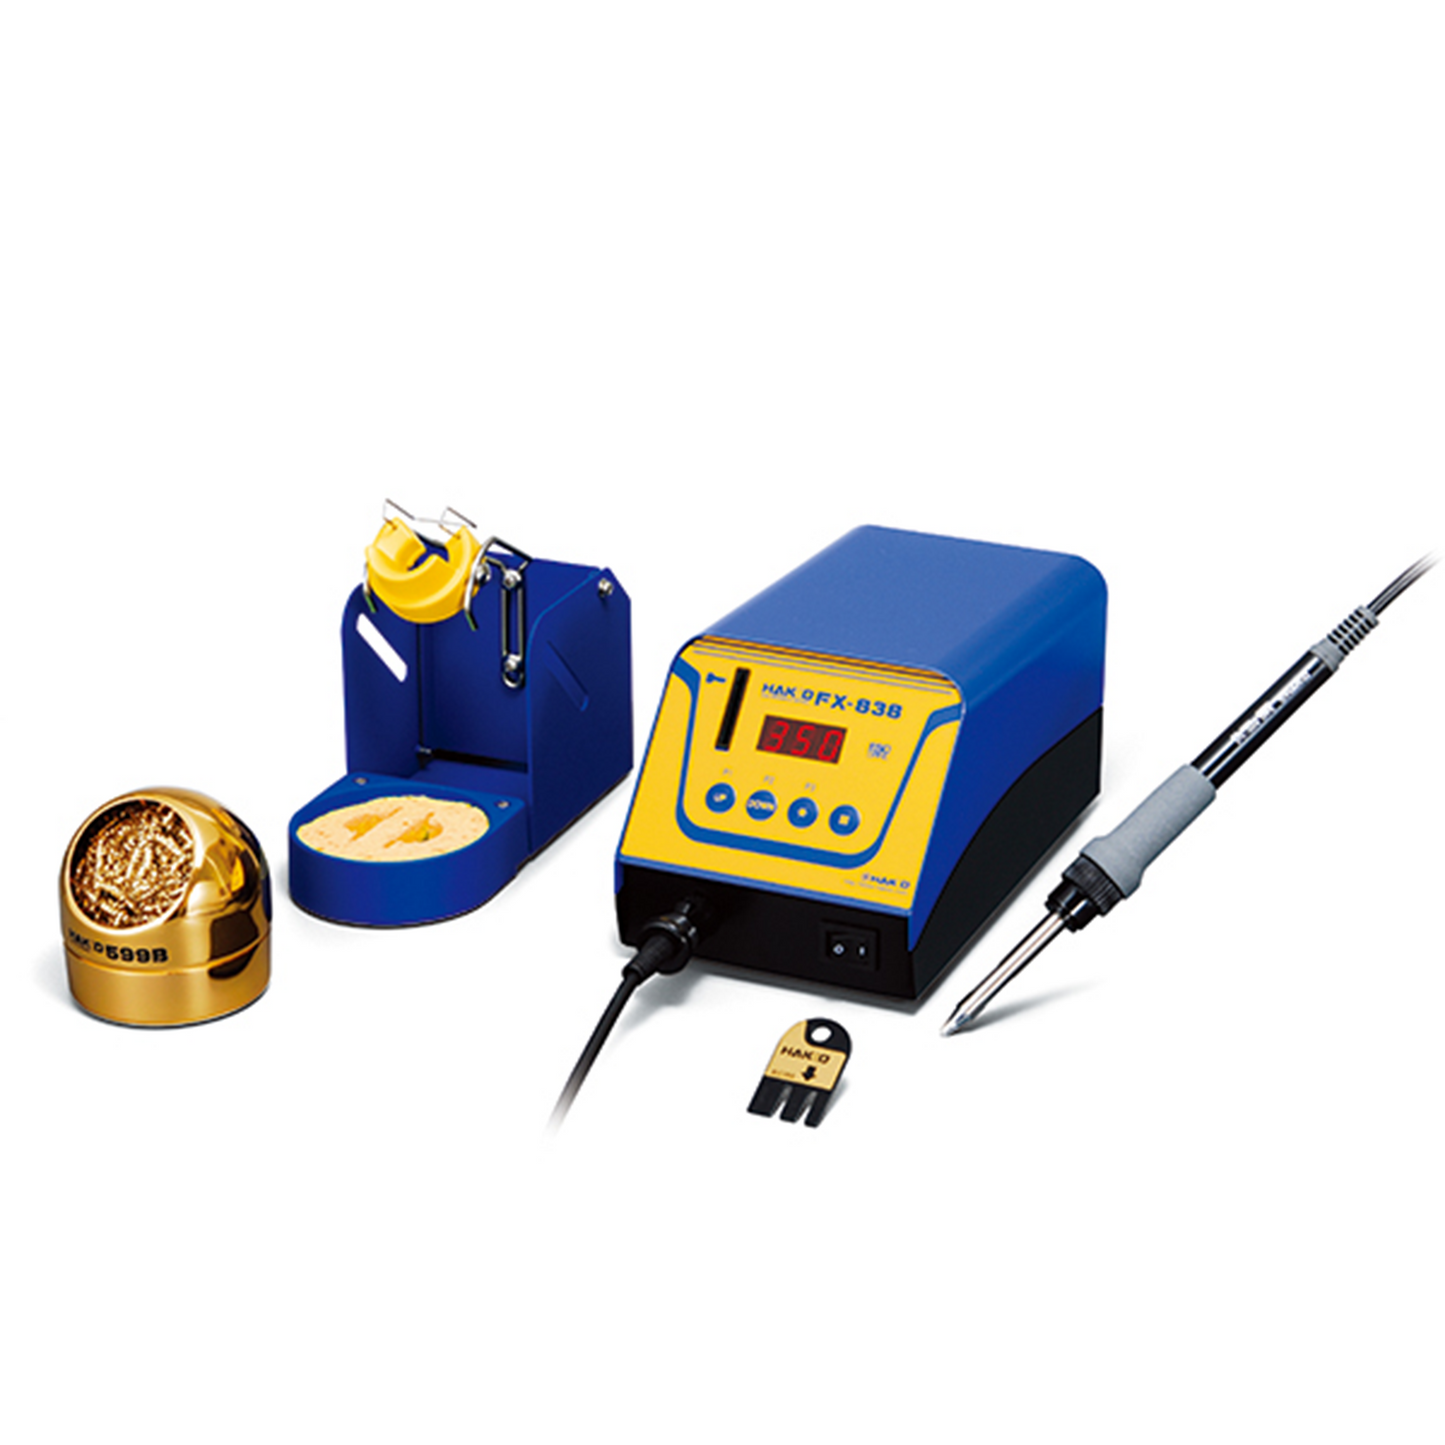 Hakko FX838 158W Soldering Station and heavy duty soldering iron compatible with T20 series tip best suited for soldering power-supply boards, heat sinks, shield cases, multilayer boards with micro components PCB SMT assembly production line. 